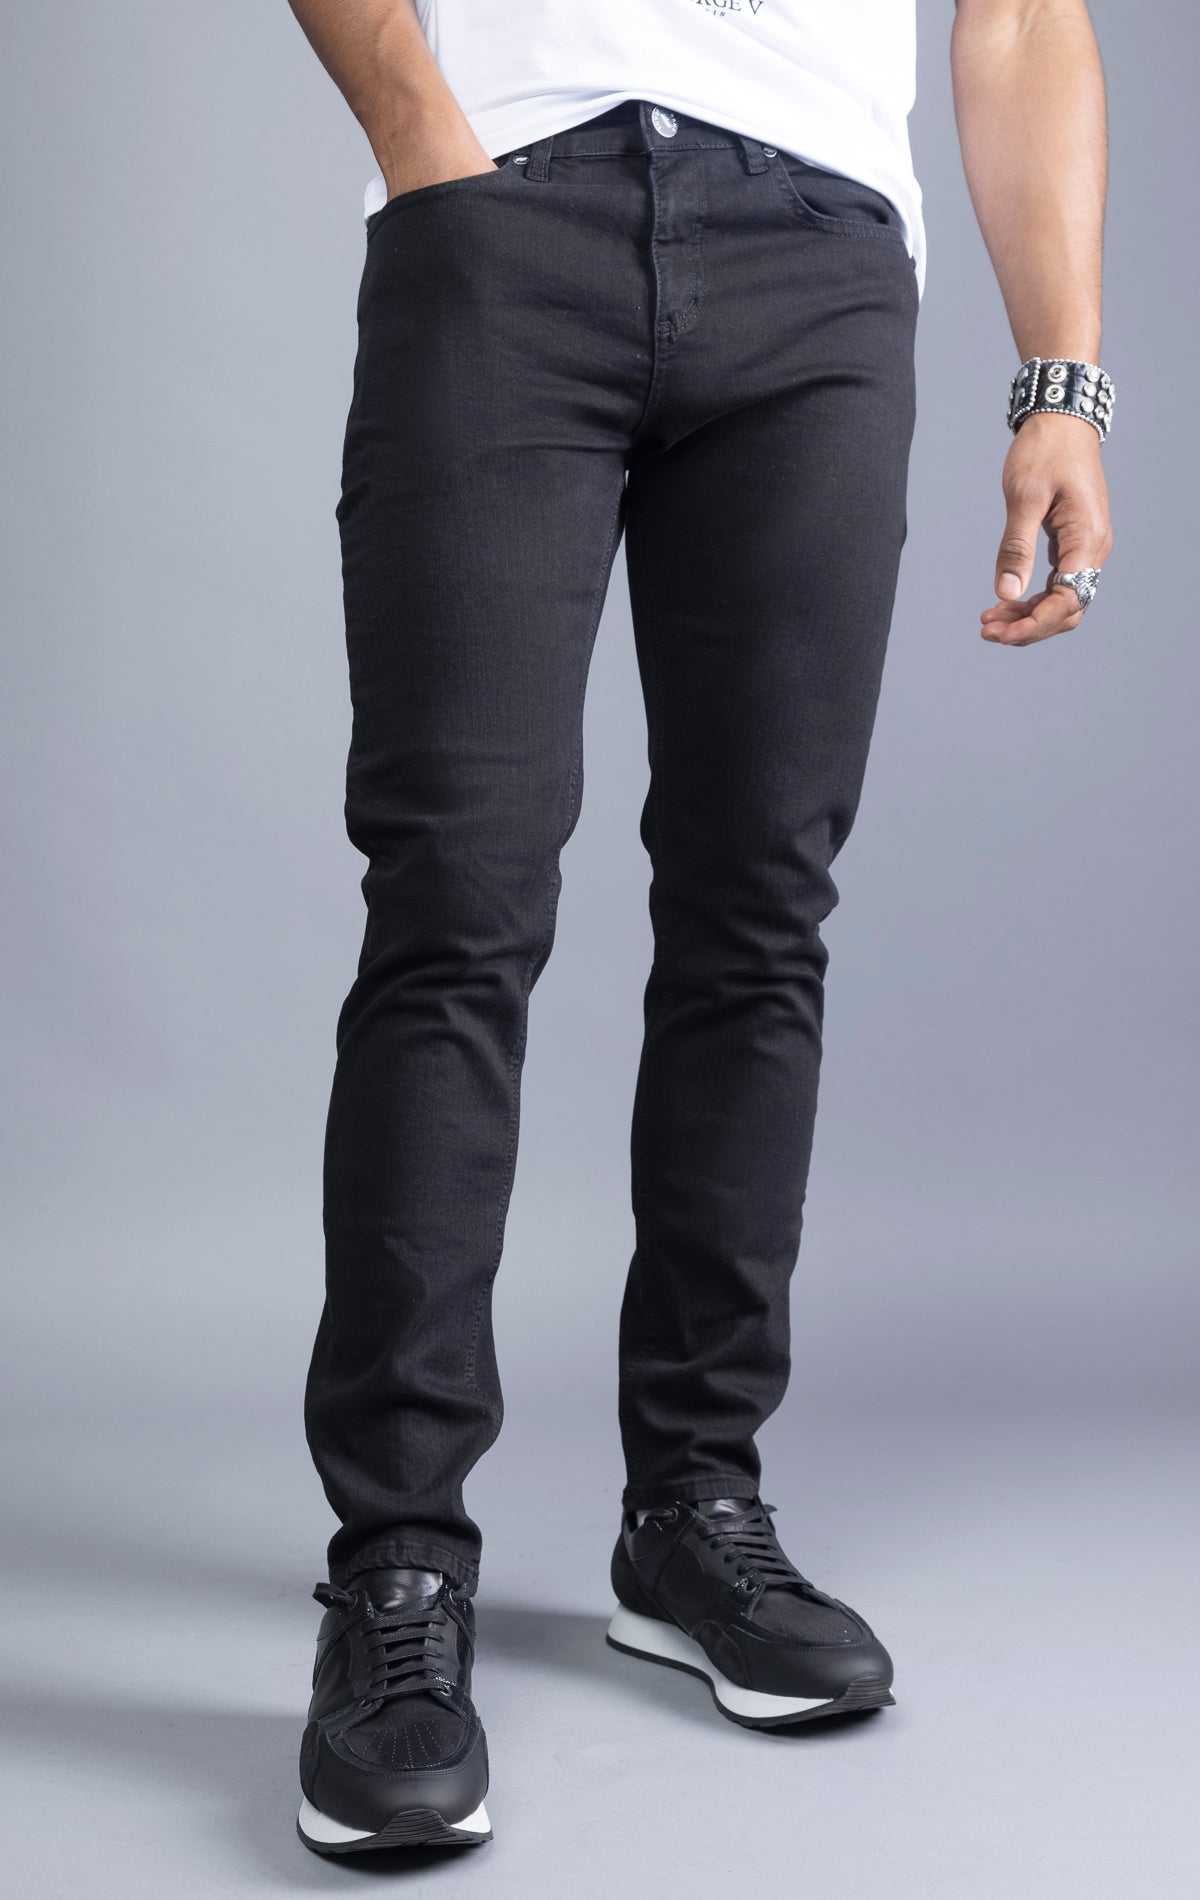 Black slim-fit jeans with a narrow leg opening and five pockets.